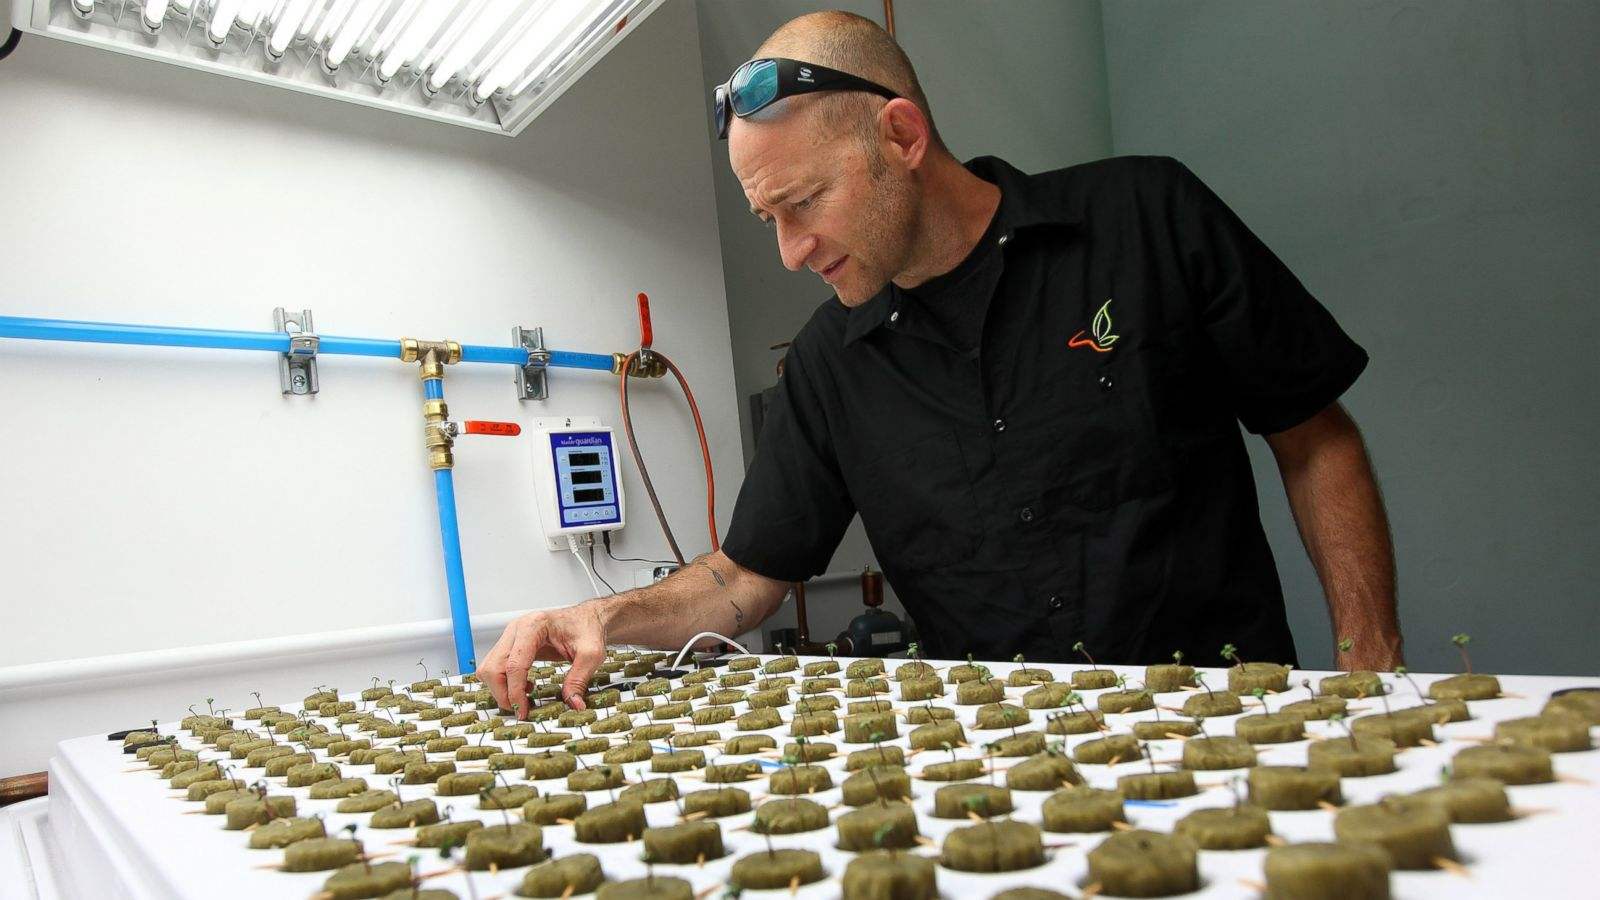 In this Sept. 24, 2015 photo, consultant Jonathan Hunt checks seedlings growing in the new marijuana growing facility on the Flandreau Santee Sioux Reservation in Flandreau, S.D. The project, according to the tribe, could generate up to $2 million a month in profit. The first joints are expected to go on sale Dec. 31 at a New Year’s Eve party. (AP Photo/Jay Pickthorn)